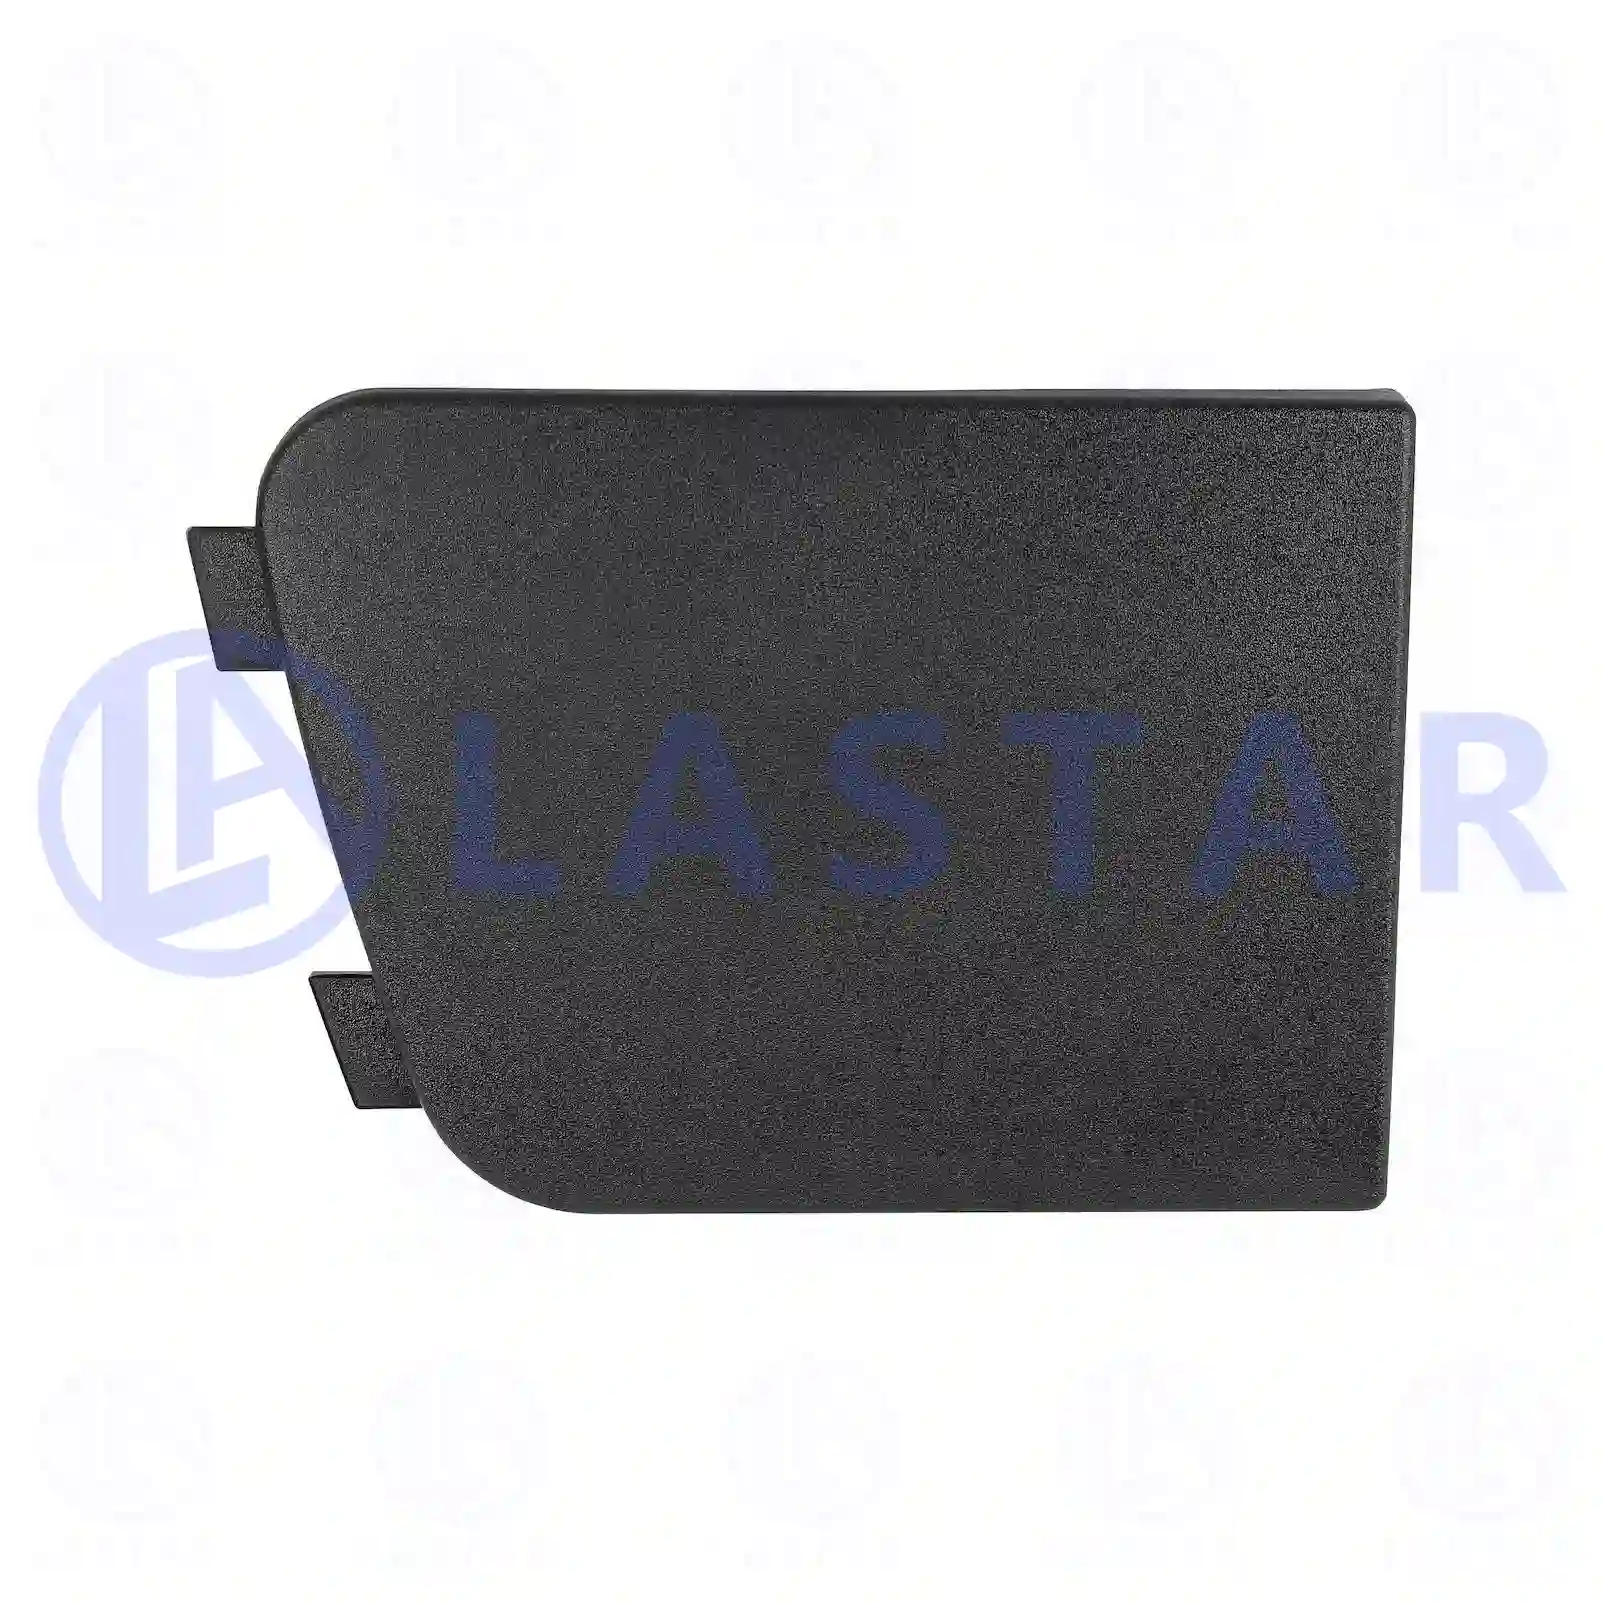 Cover, front grill, right, 77720199, 20529706, 3175546, ZG60456-0008 ||  77720199 Lastar Spare Part | Truck Spare Parts, Auotomotive Spare Parts Cover, front grill, right, 77720199, 20529706, 3175546, ZG60456-0008 ||  77720199 Lastar Spare Part | Truck Spare Parts, Auotomotive Spare Parts